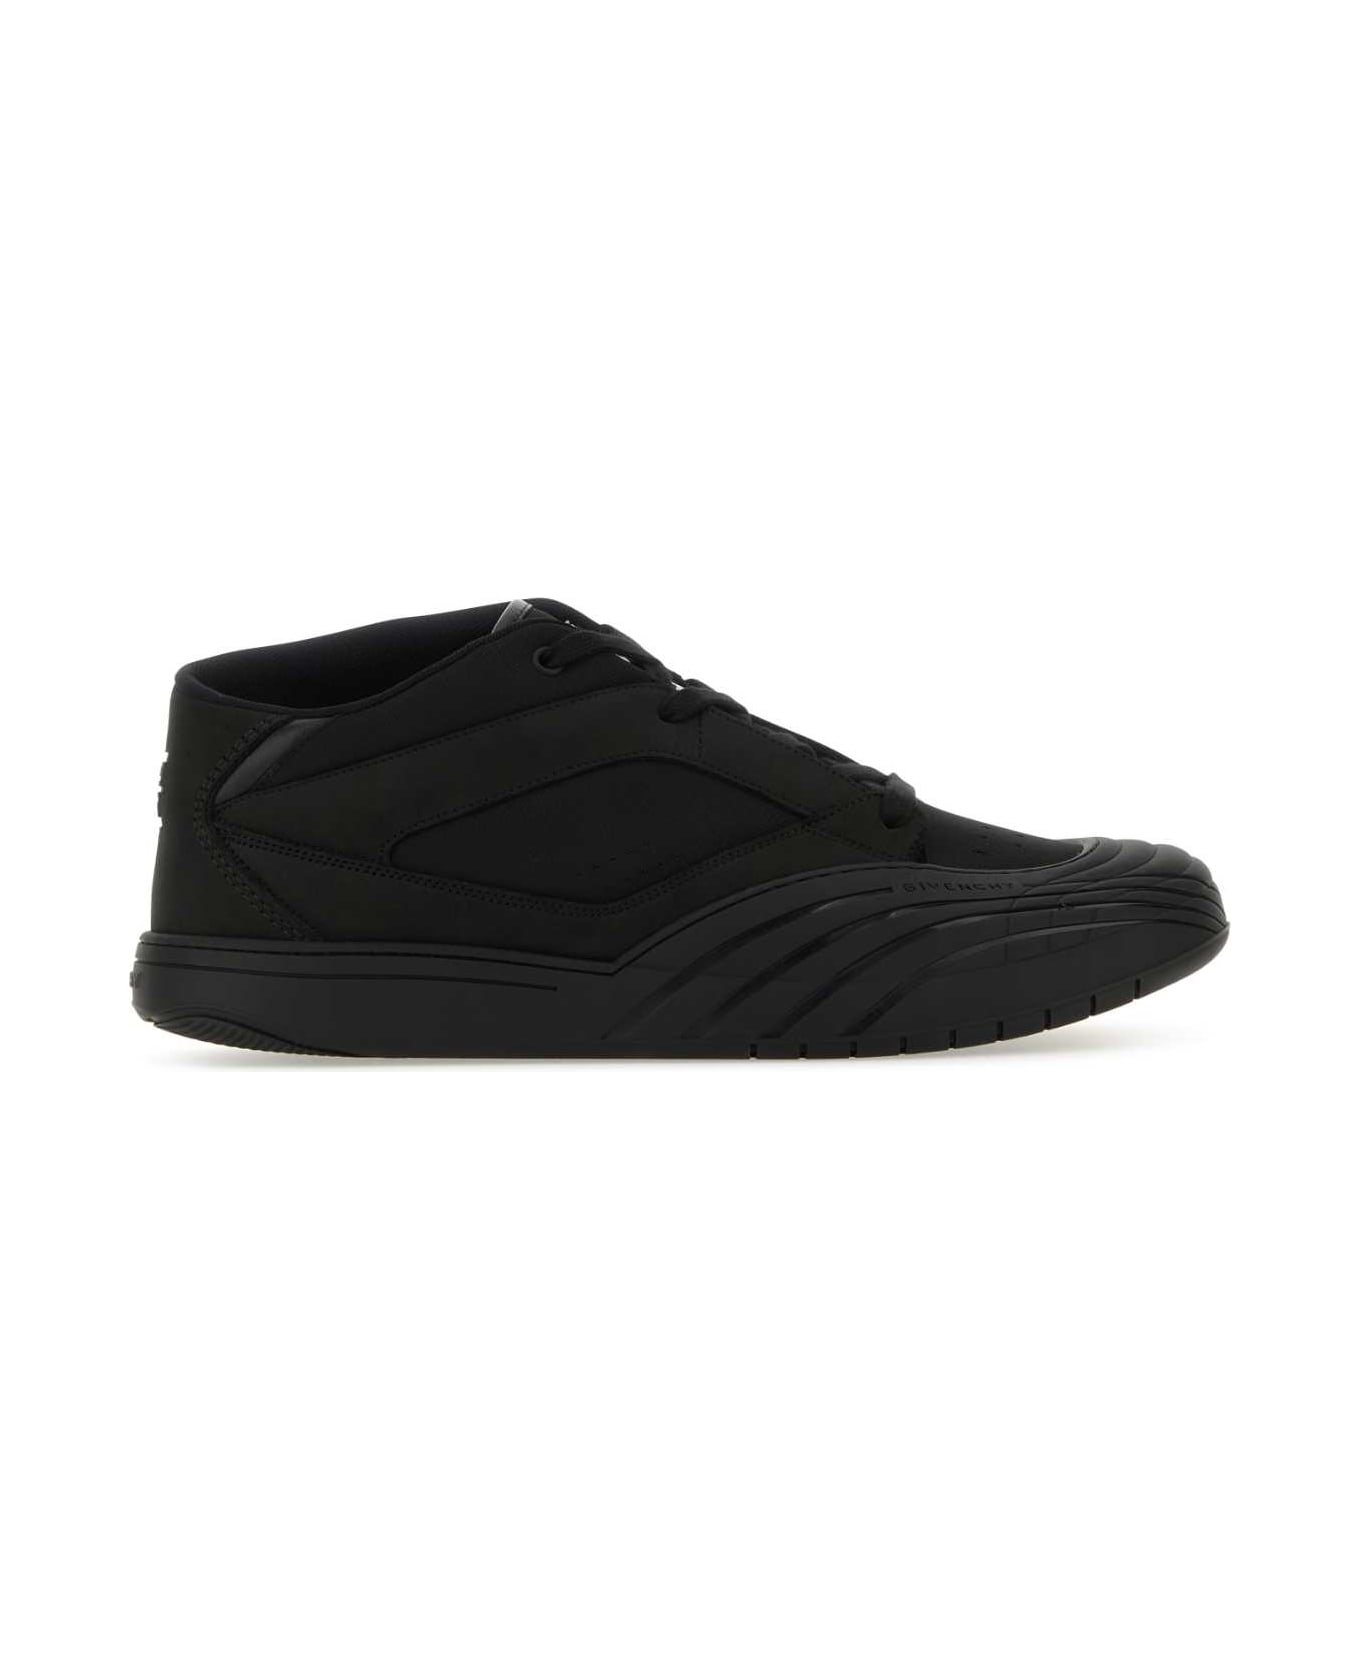 Givenchy Black Fabric And Leather Skate Sneakers - Black